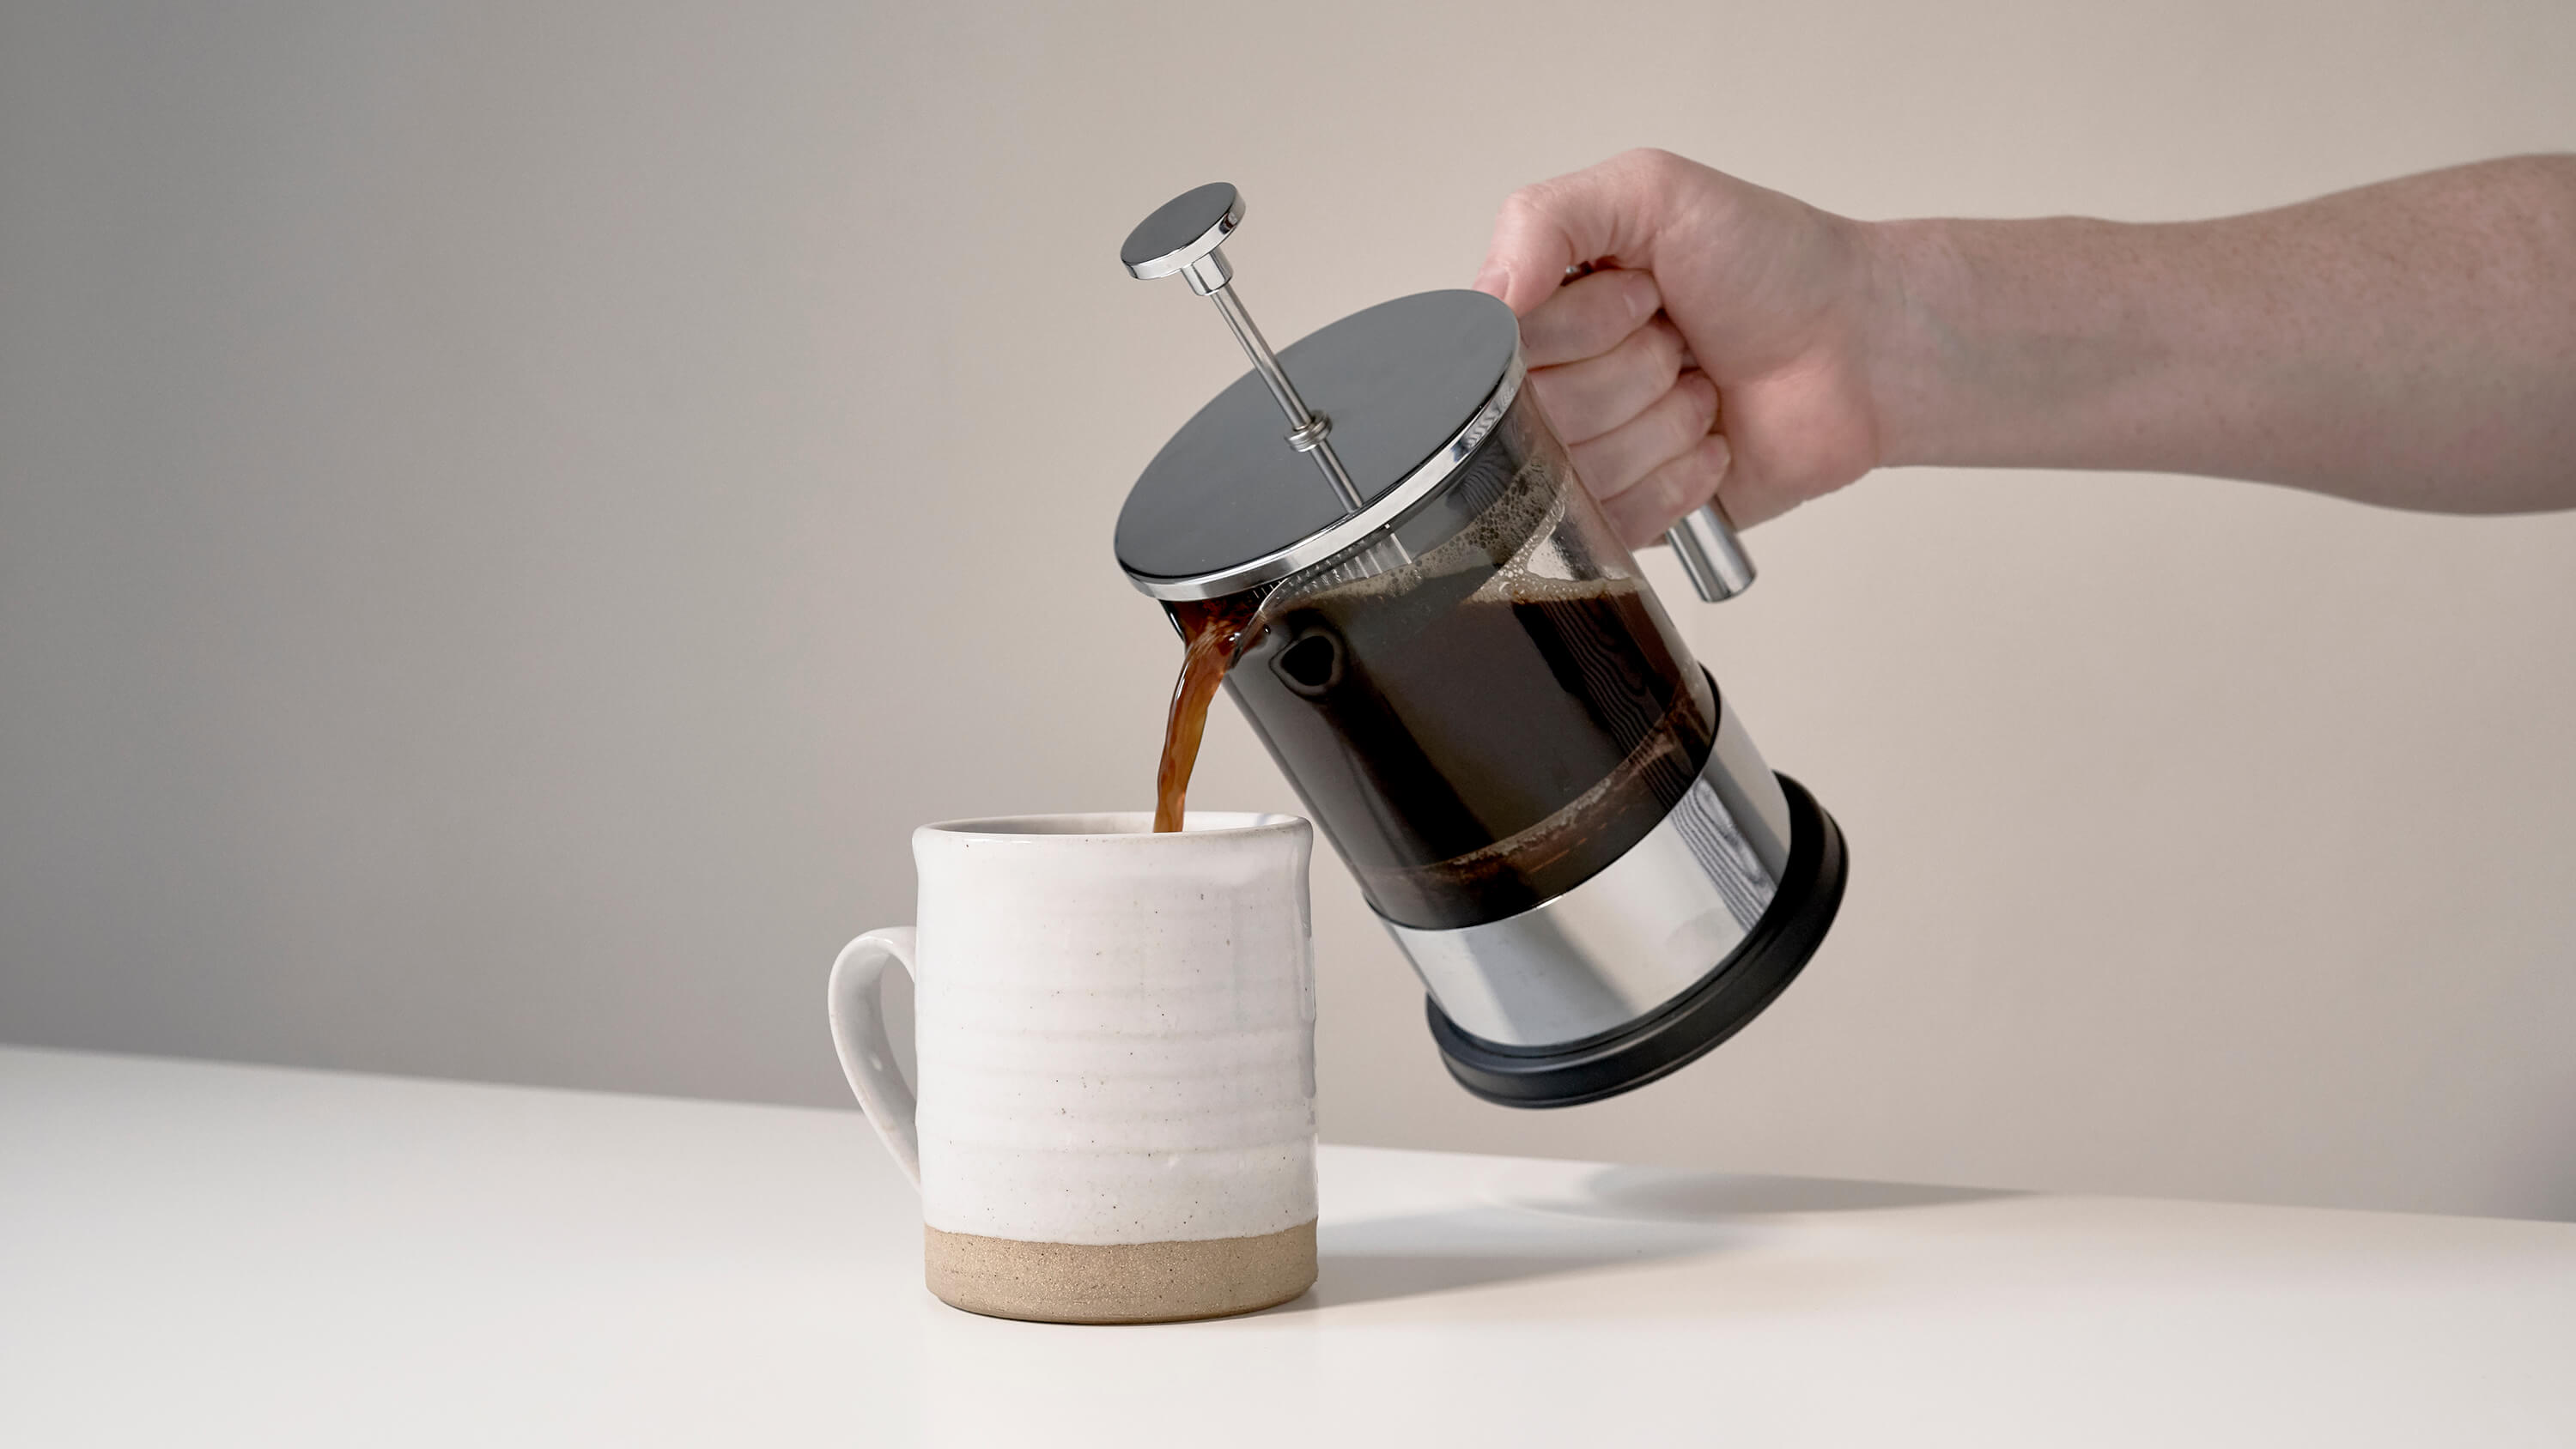 French Press Paper Filters - Extra Large